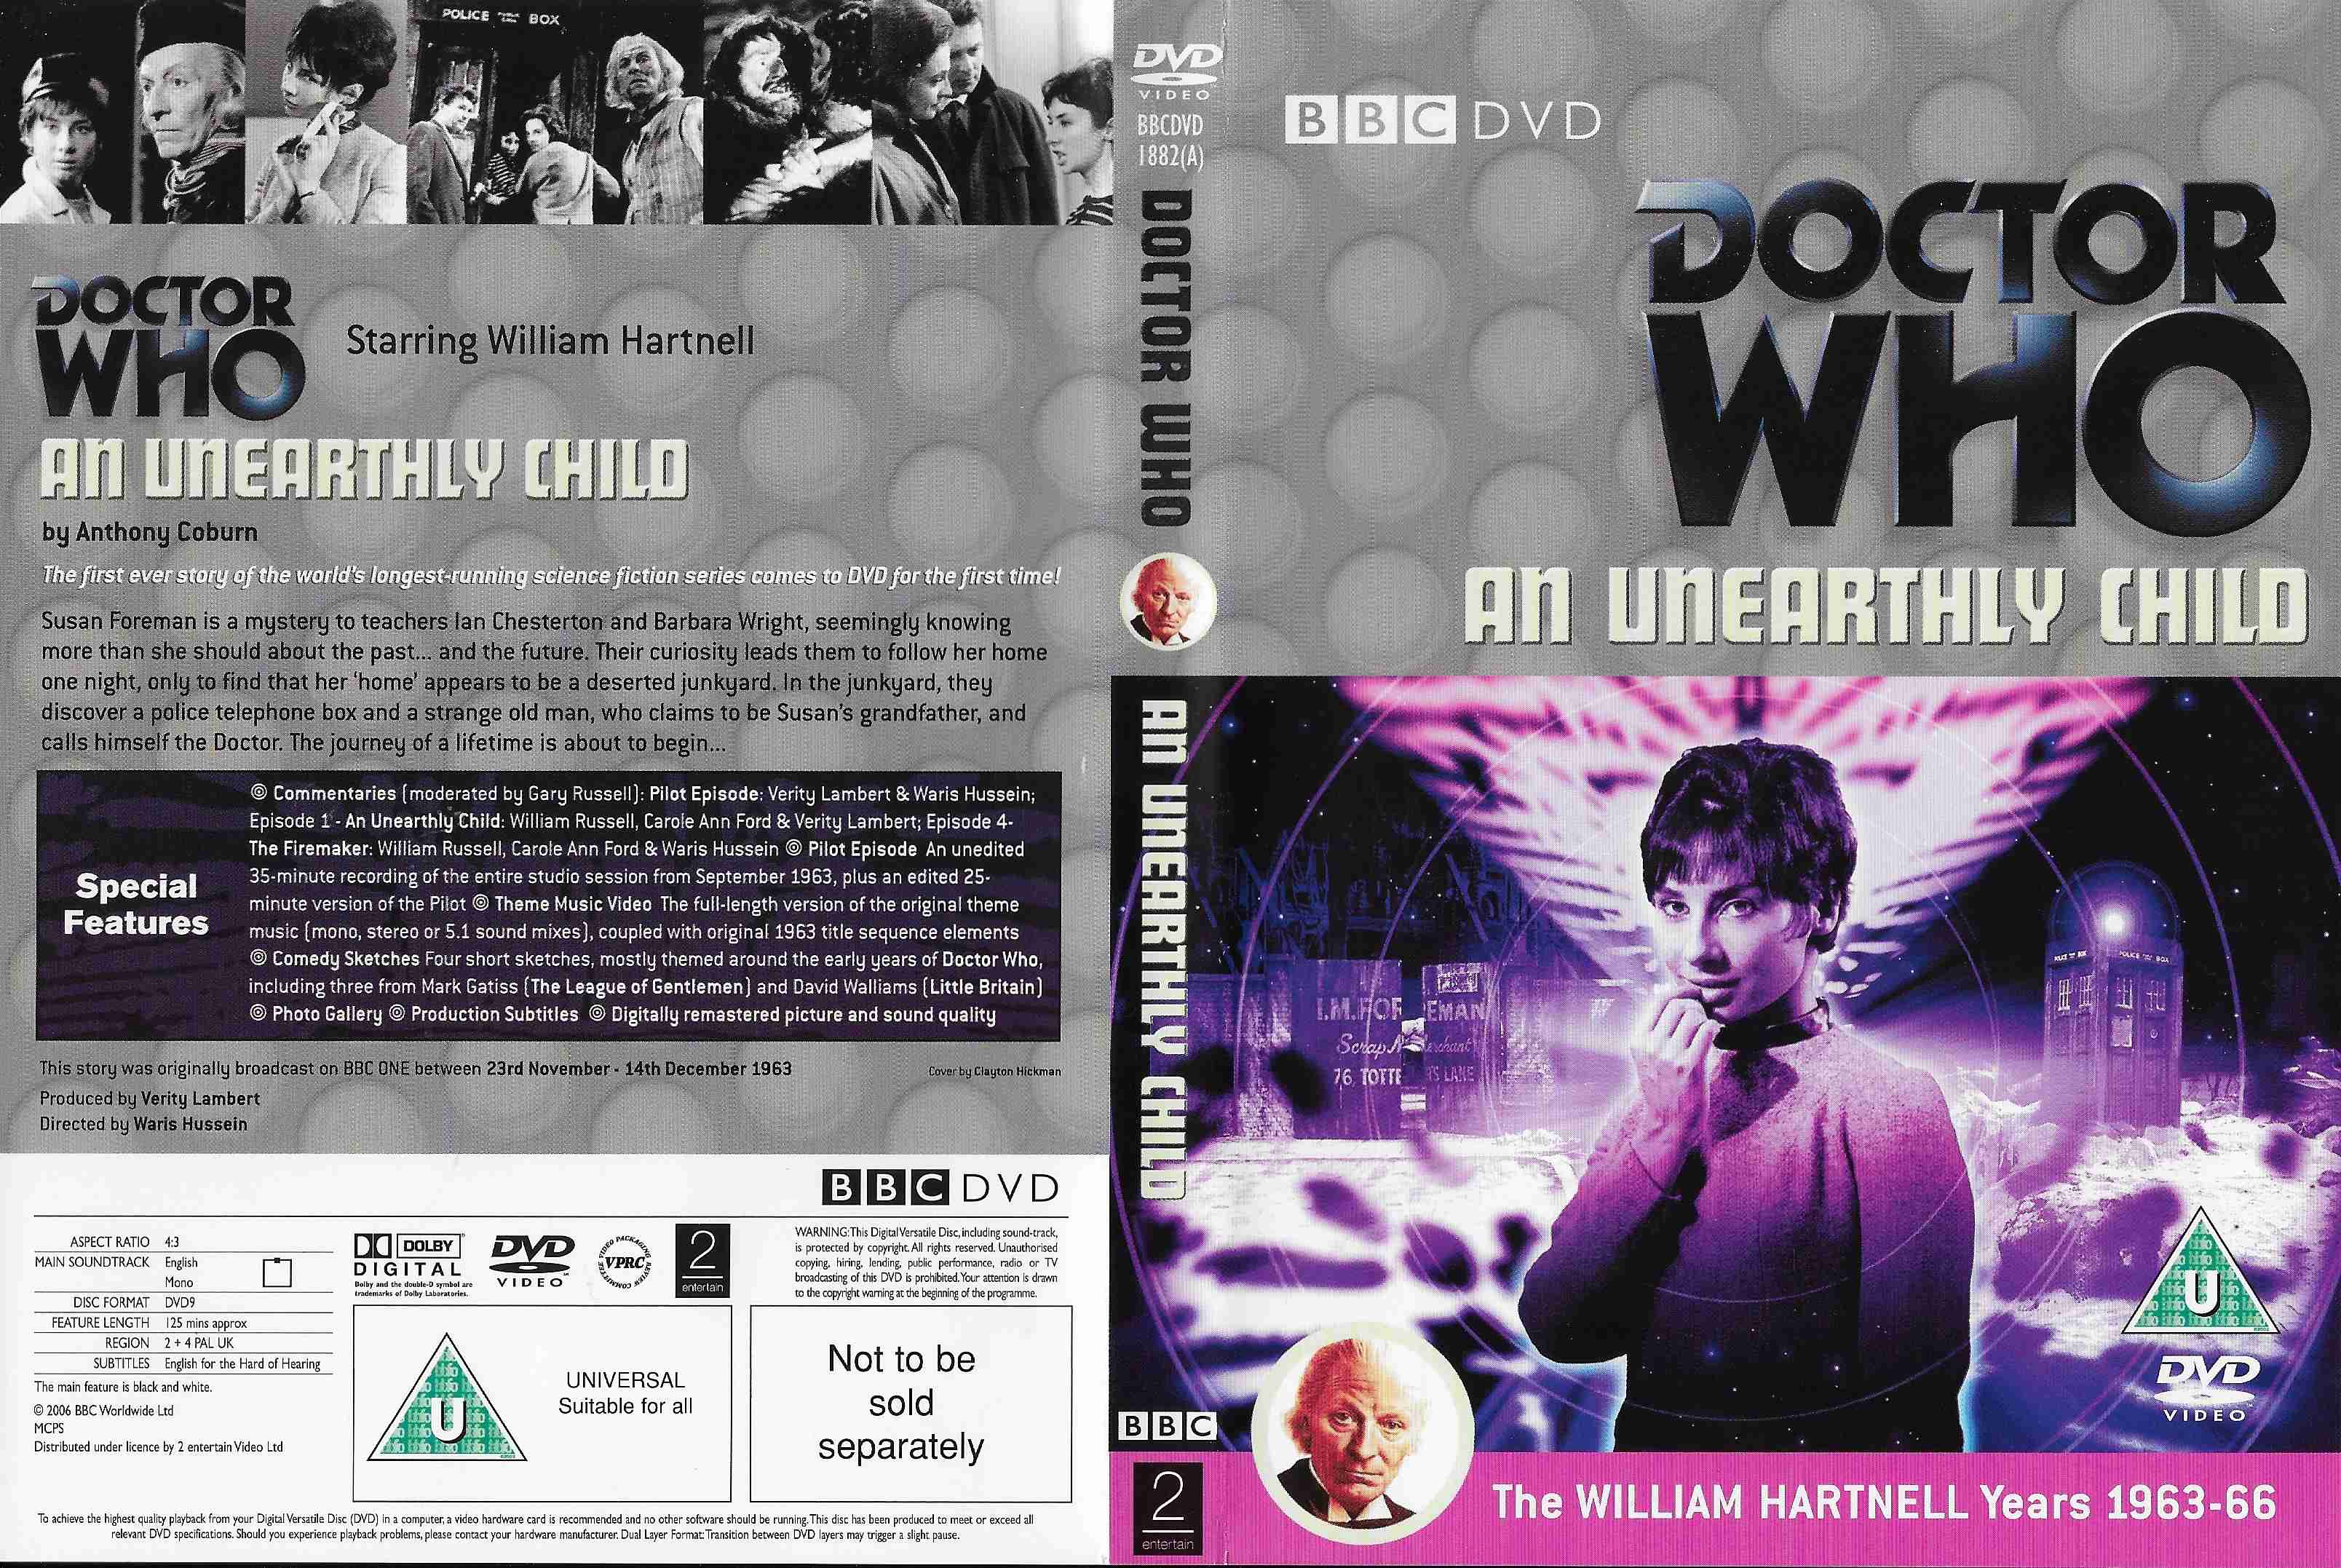 Picture of BBCDVD 1882A Doctor Who - An unearthly child by artist Anthony Coburn from the BBC records and Tapes library